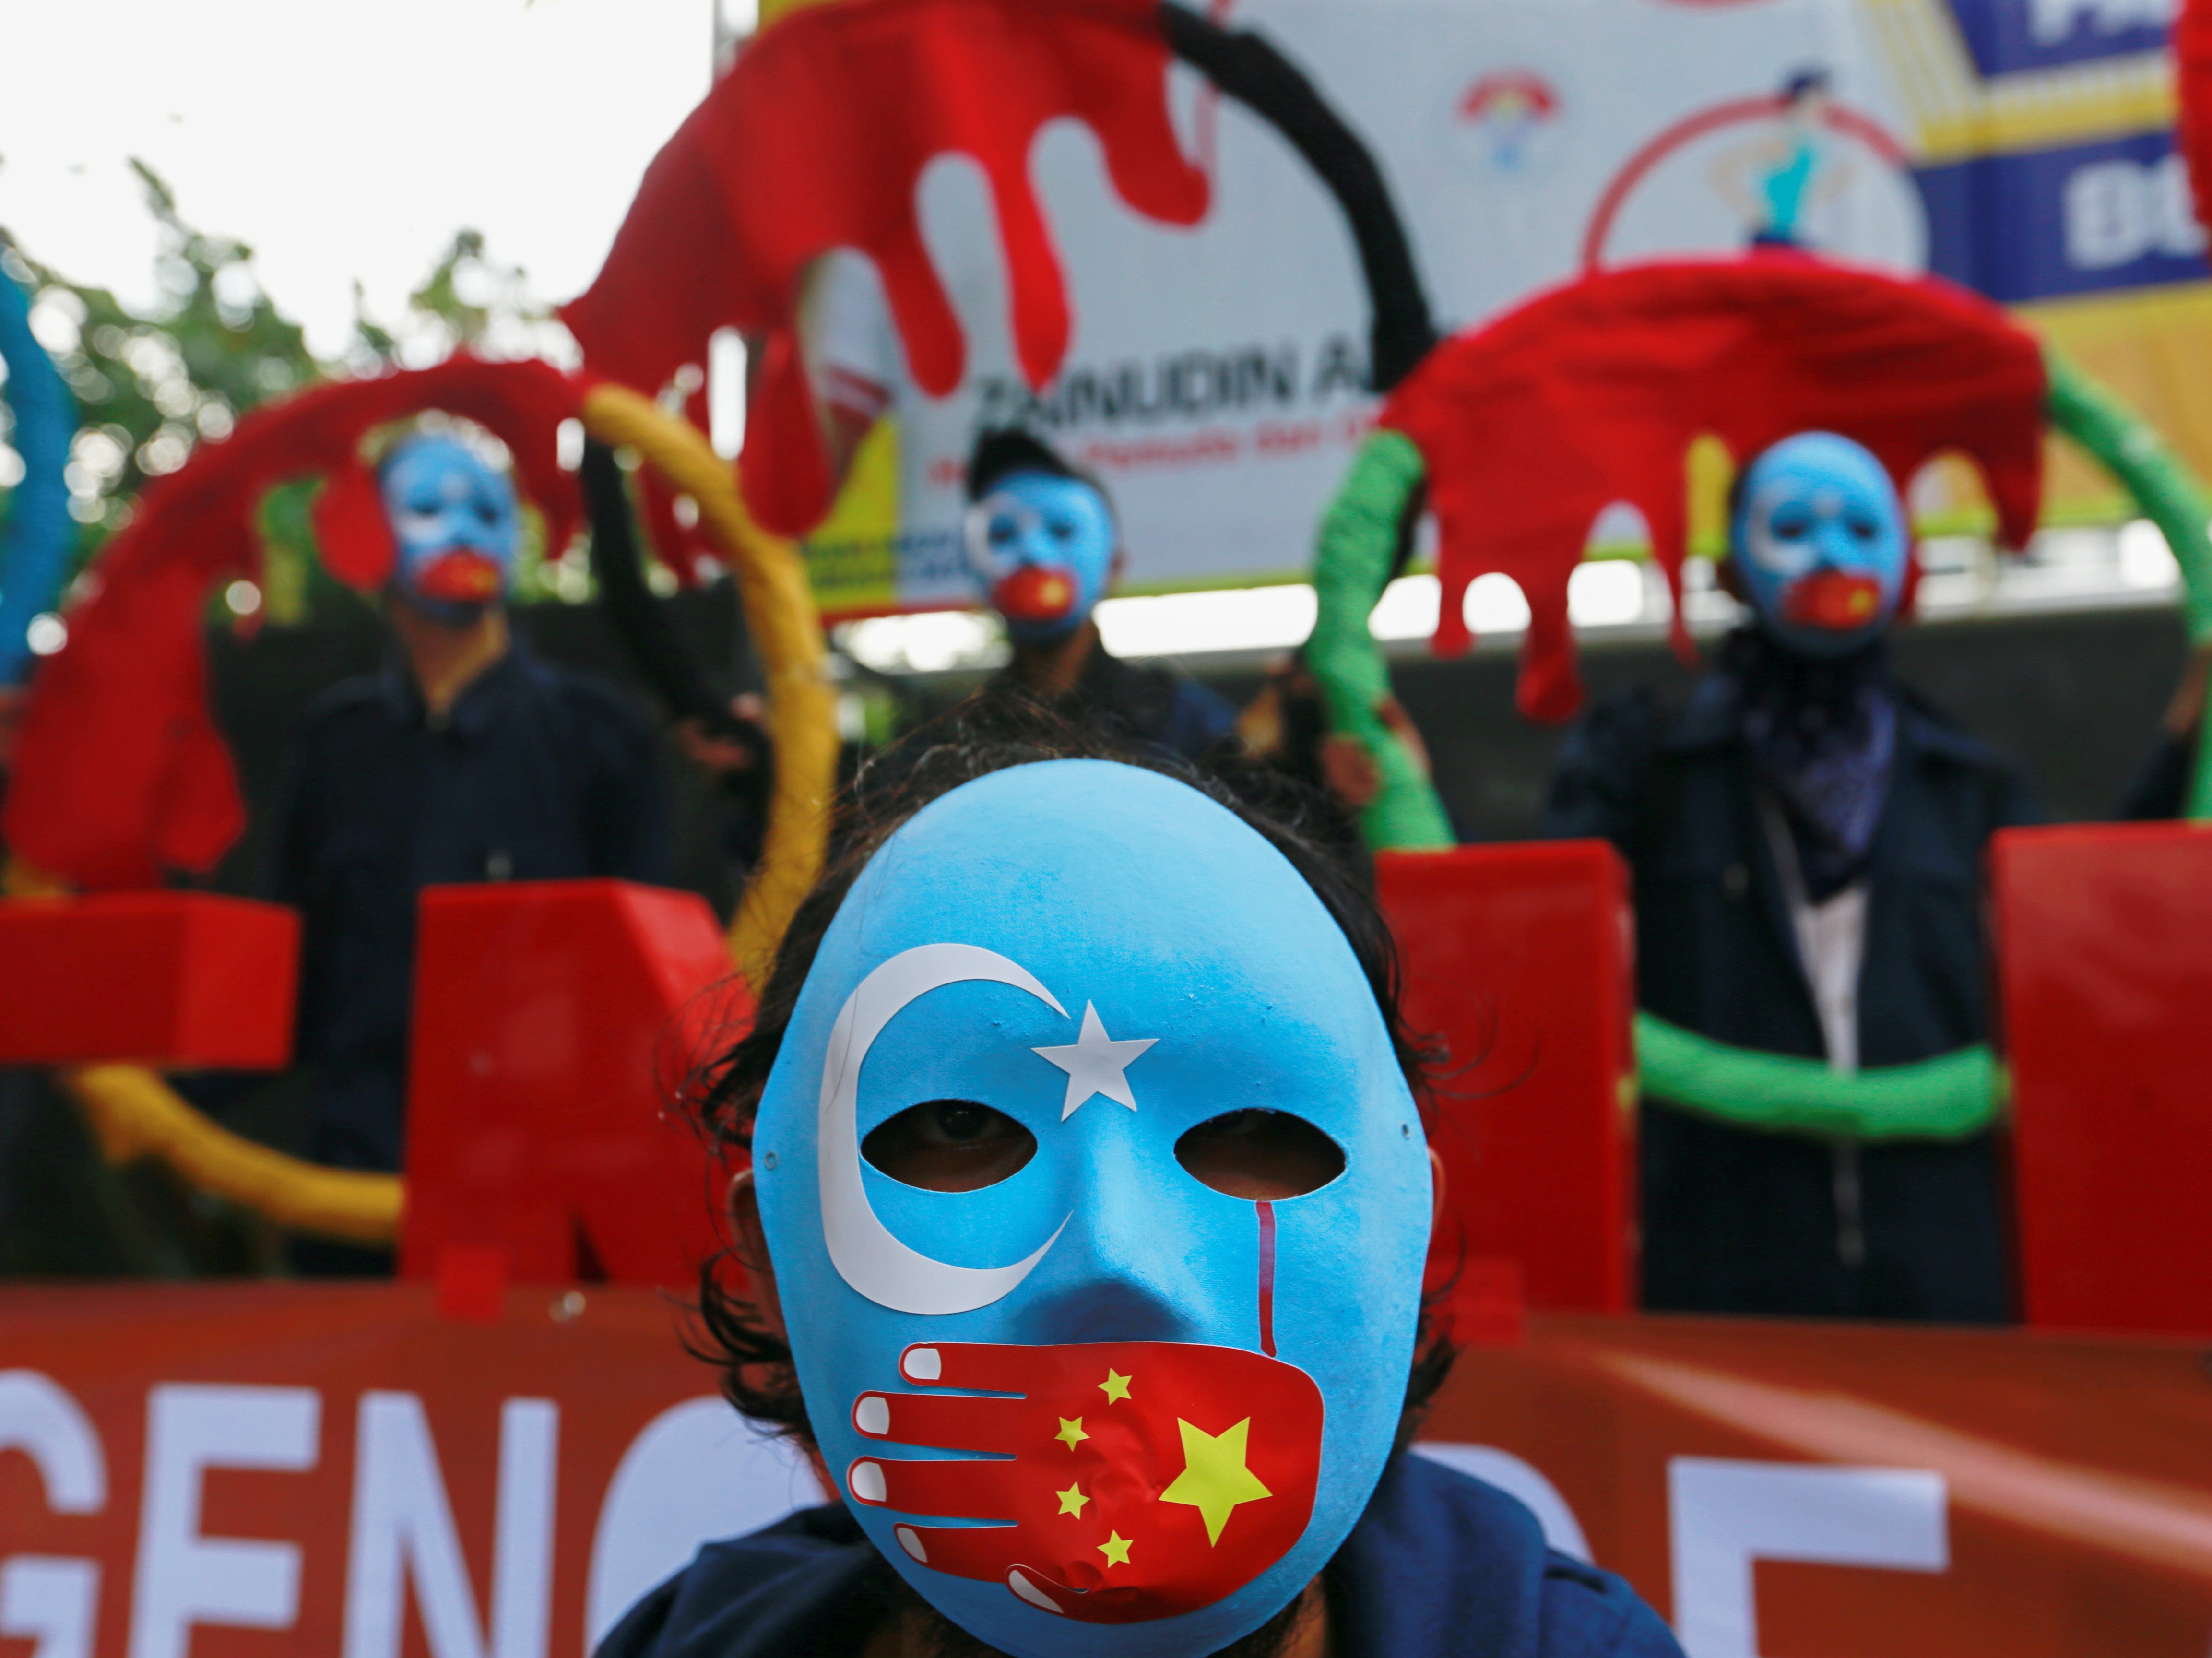 Activists in Indonesia take part in protest to boycott the Beijing 2022 Winter Olympics